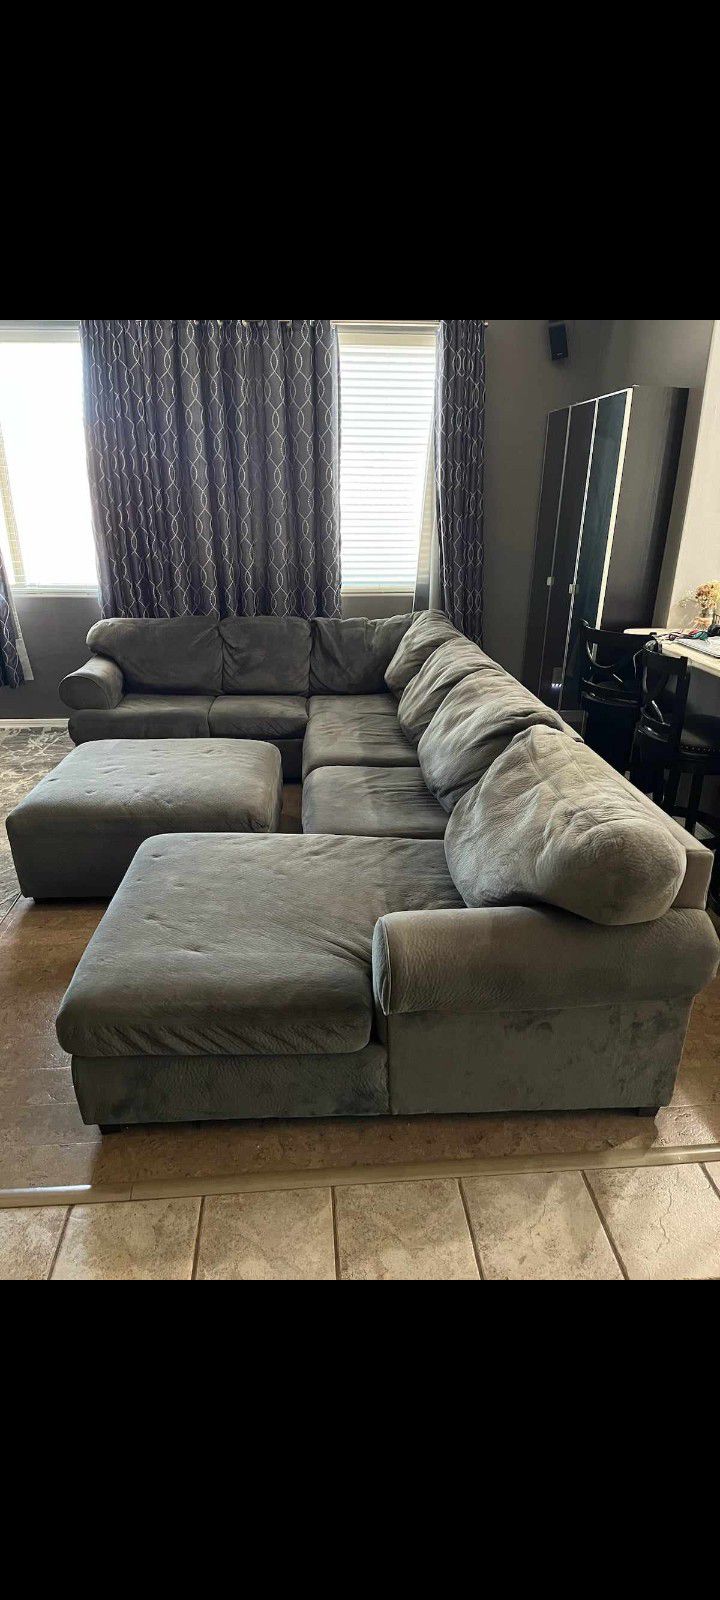 DARK GRAY SECTIONAL COUCH IN GOOD CONDITION. ( WONT BE AVAILABLE UNTIL SUNDAY 5/26 $350